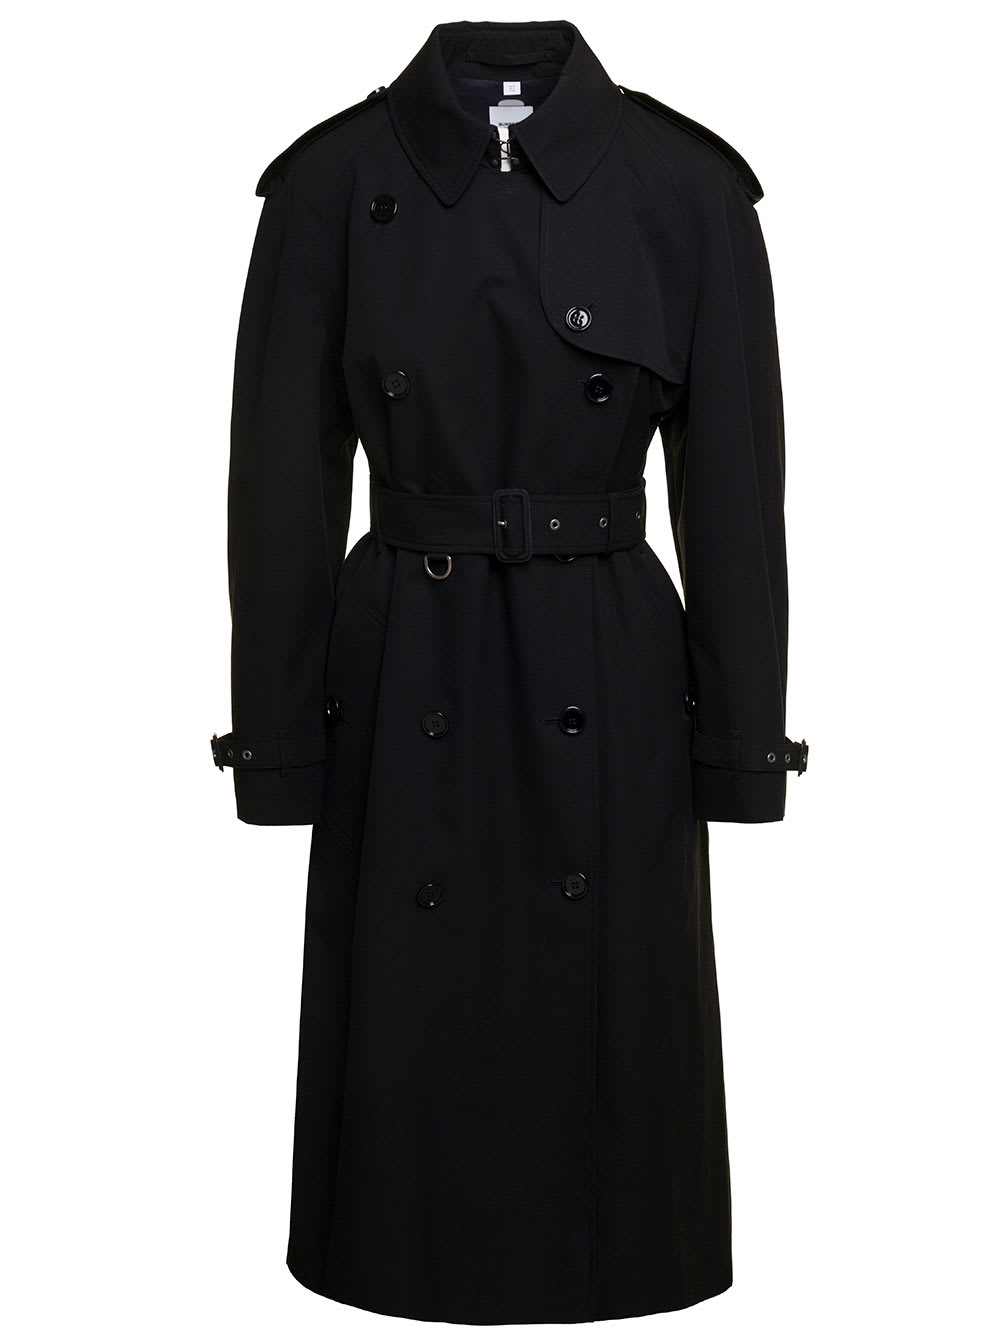 BURBERRY BLACK DOUBLE-BREASTED TRENCH COAT WITH BELT IN COTTON WOMAN